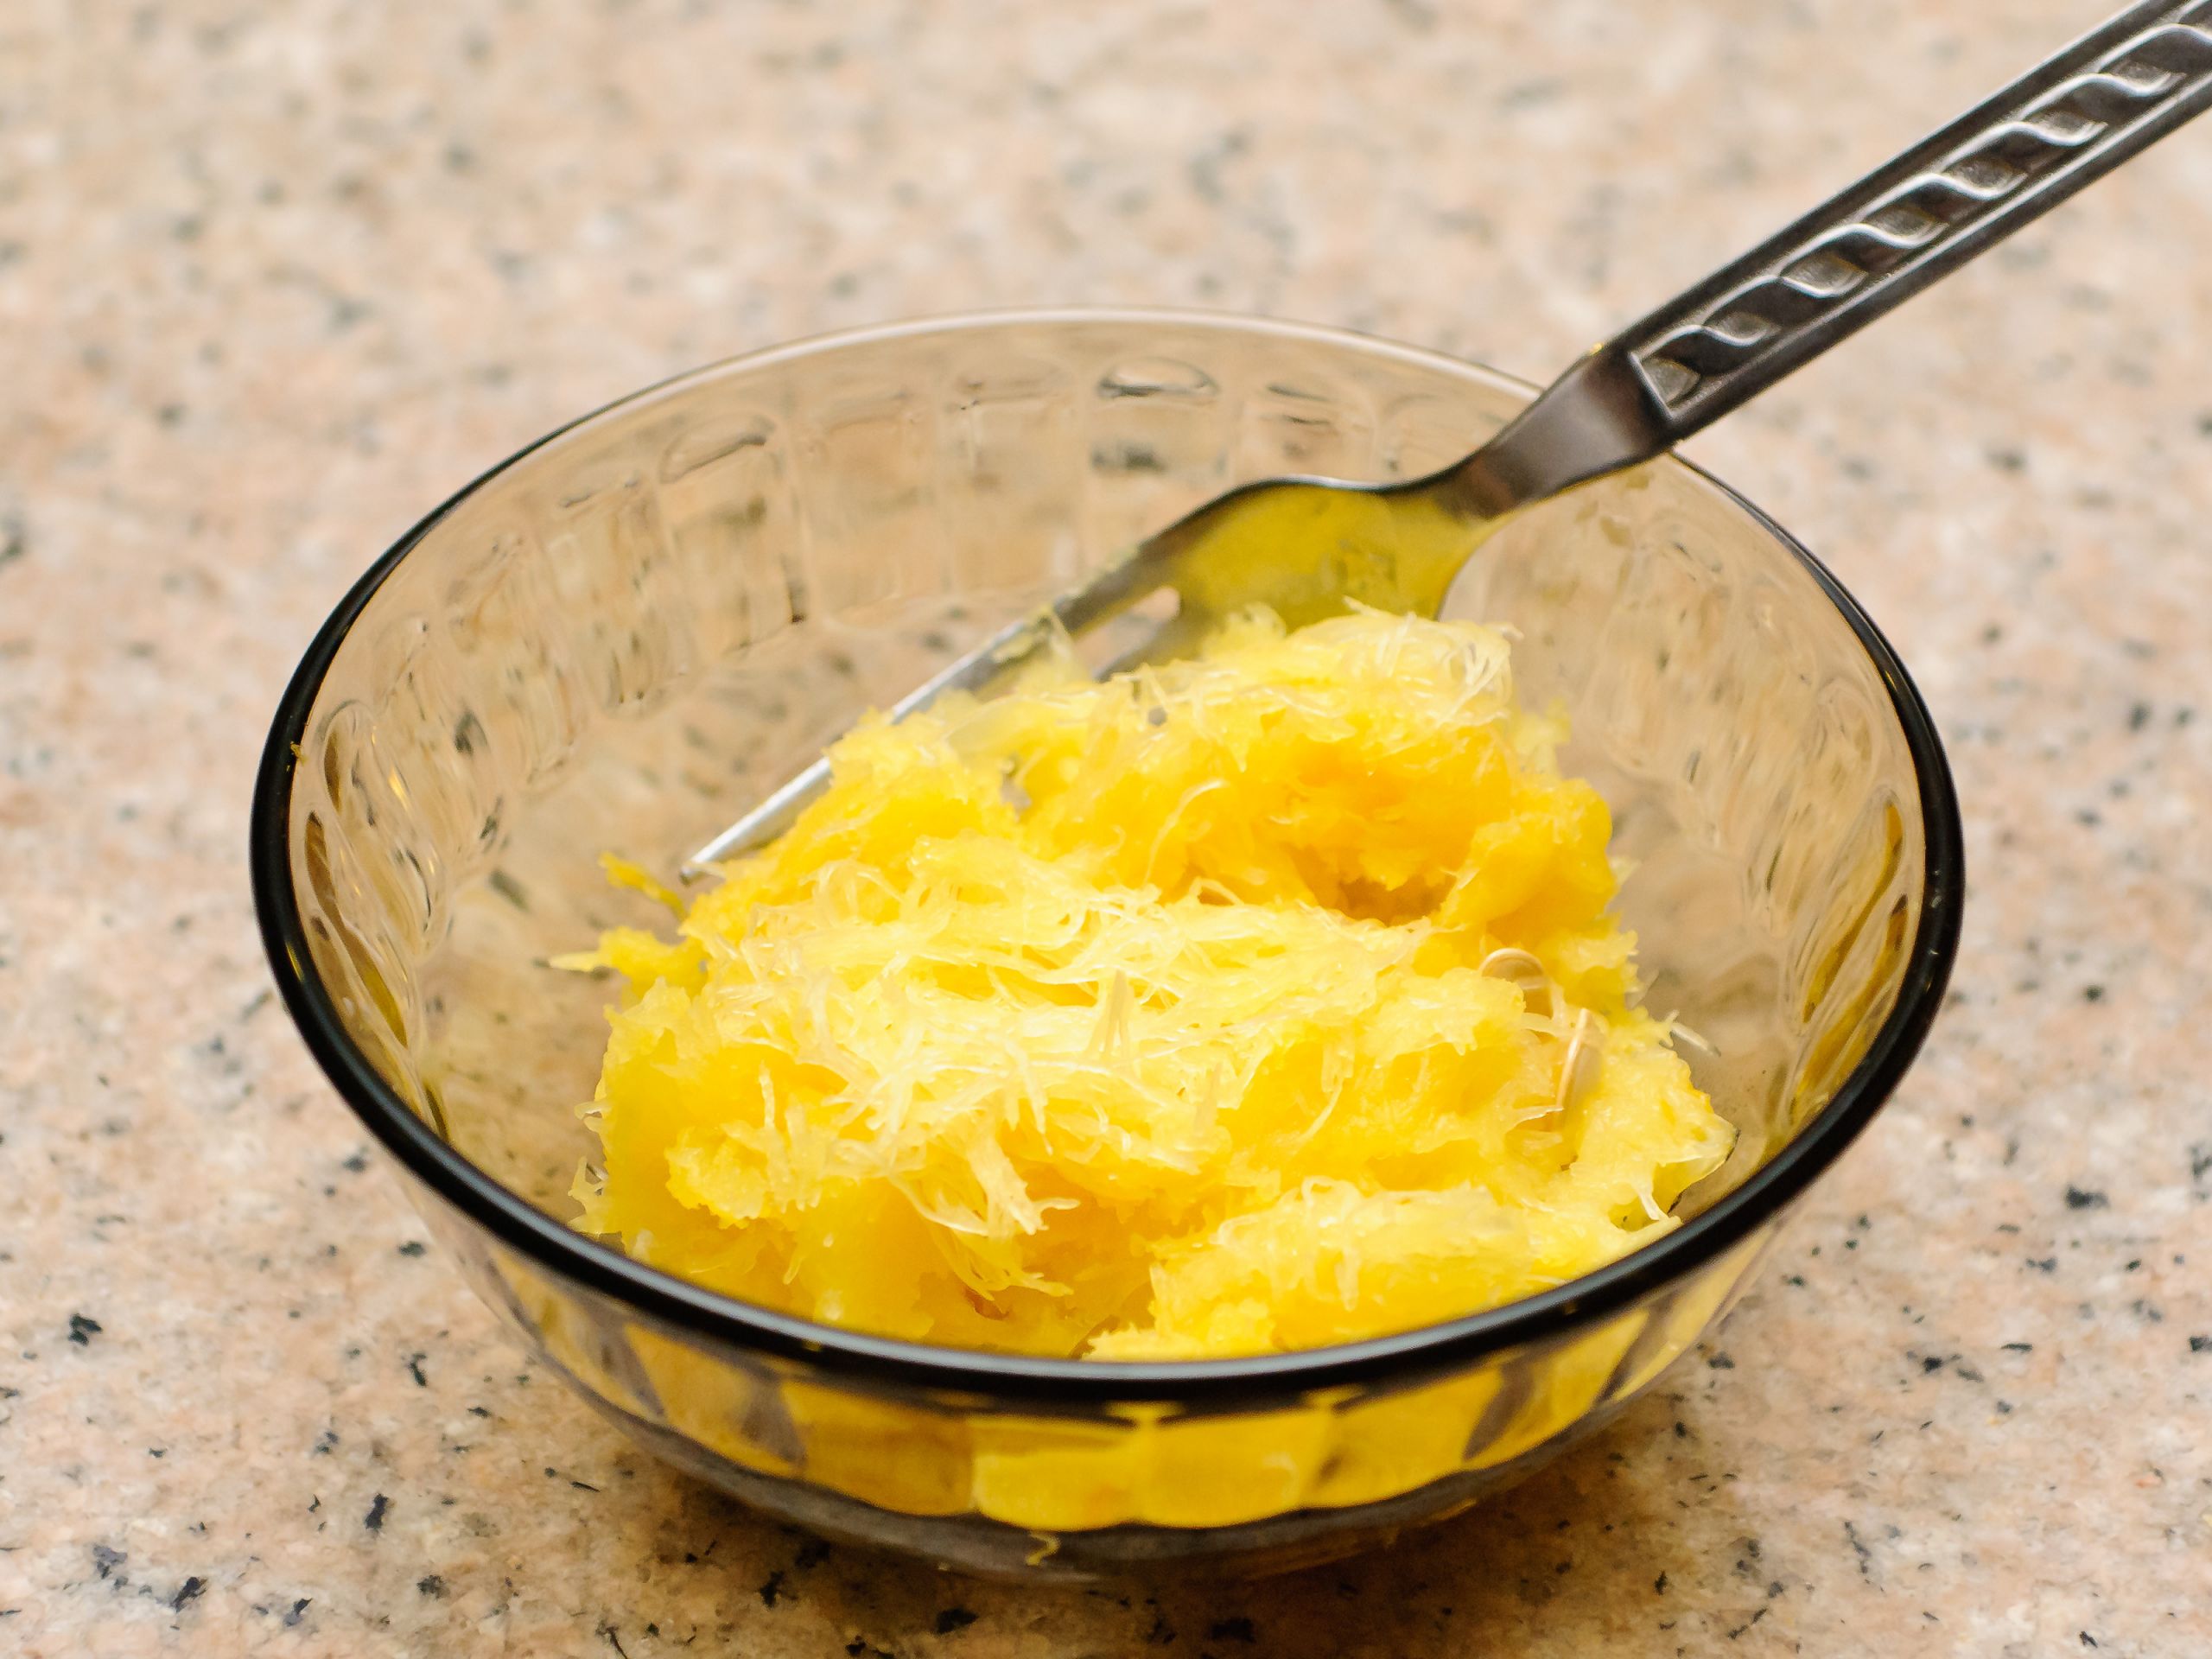 Spaghetti Squash Microwave Whole
 How to Cook Spaghetti Squash in Microwave with